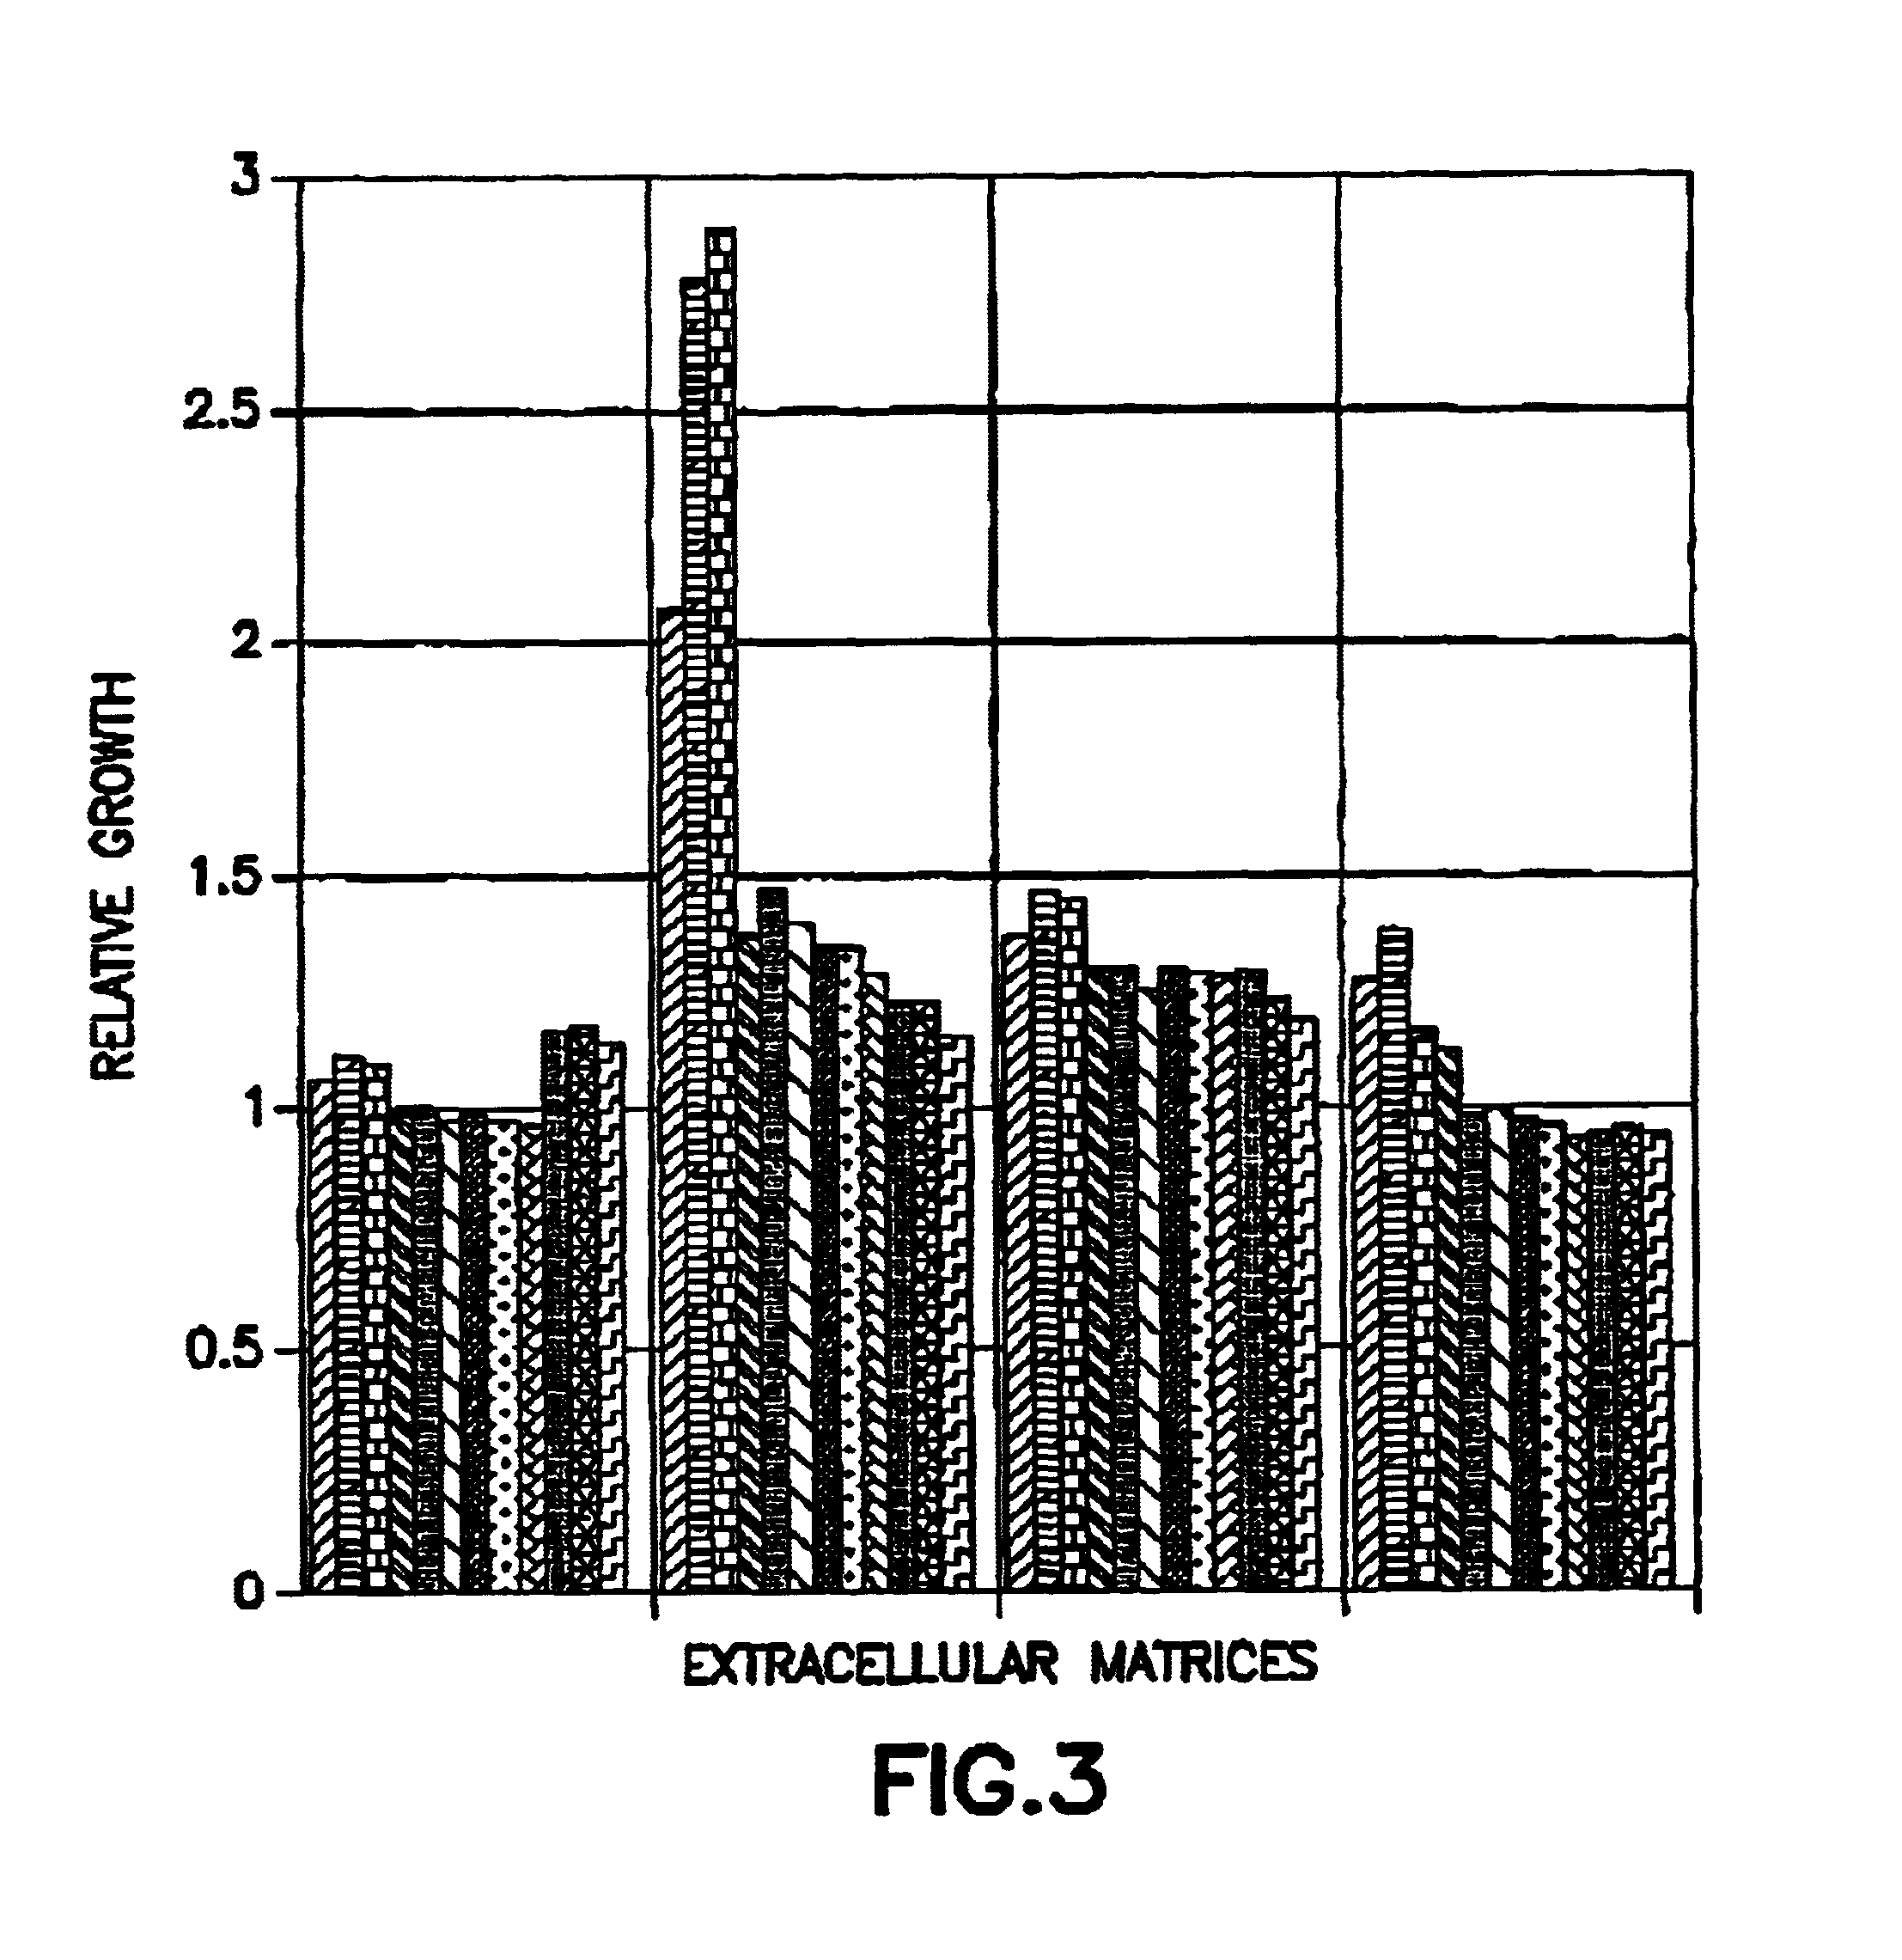 Method for determining the presence or absence of respiring cells on a three-dimensional scaffold